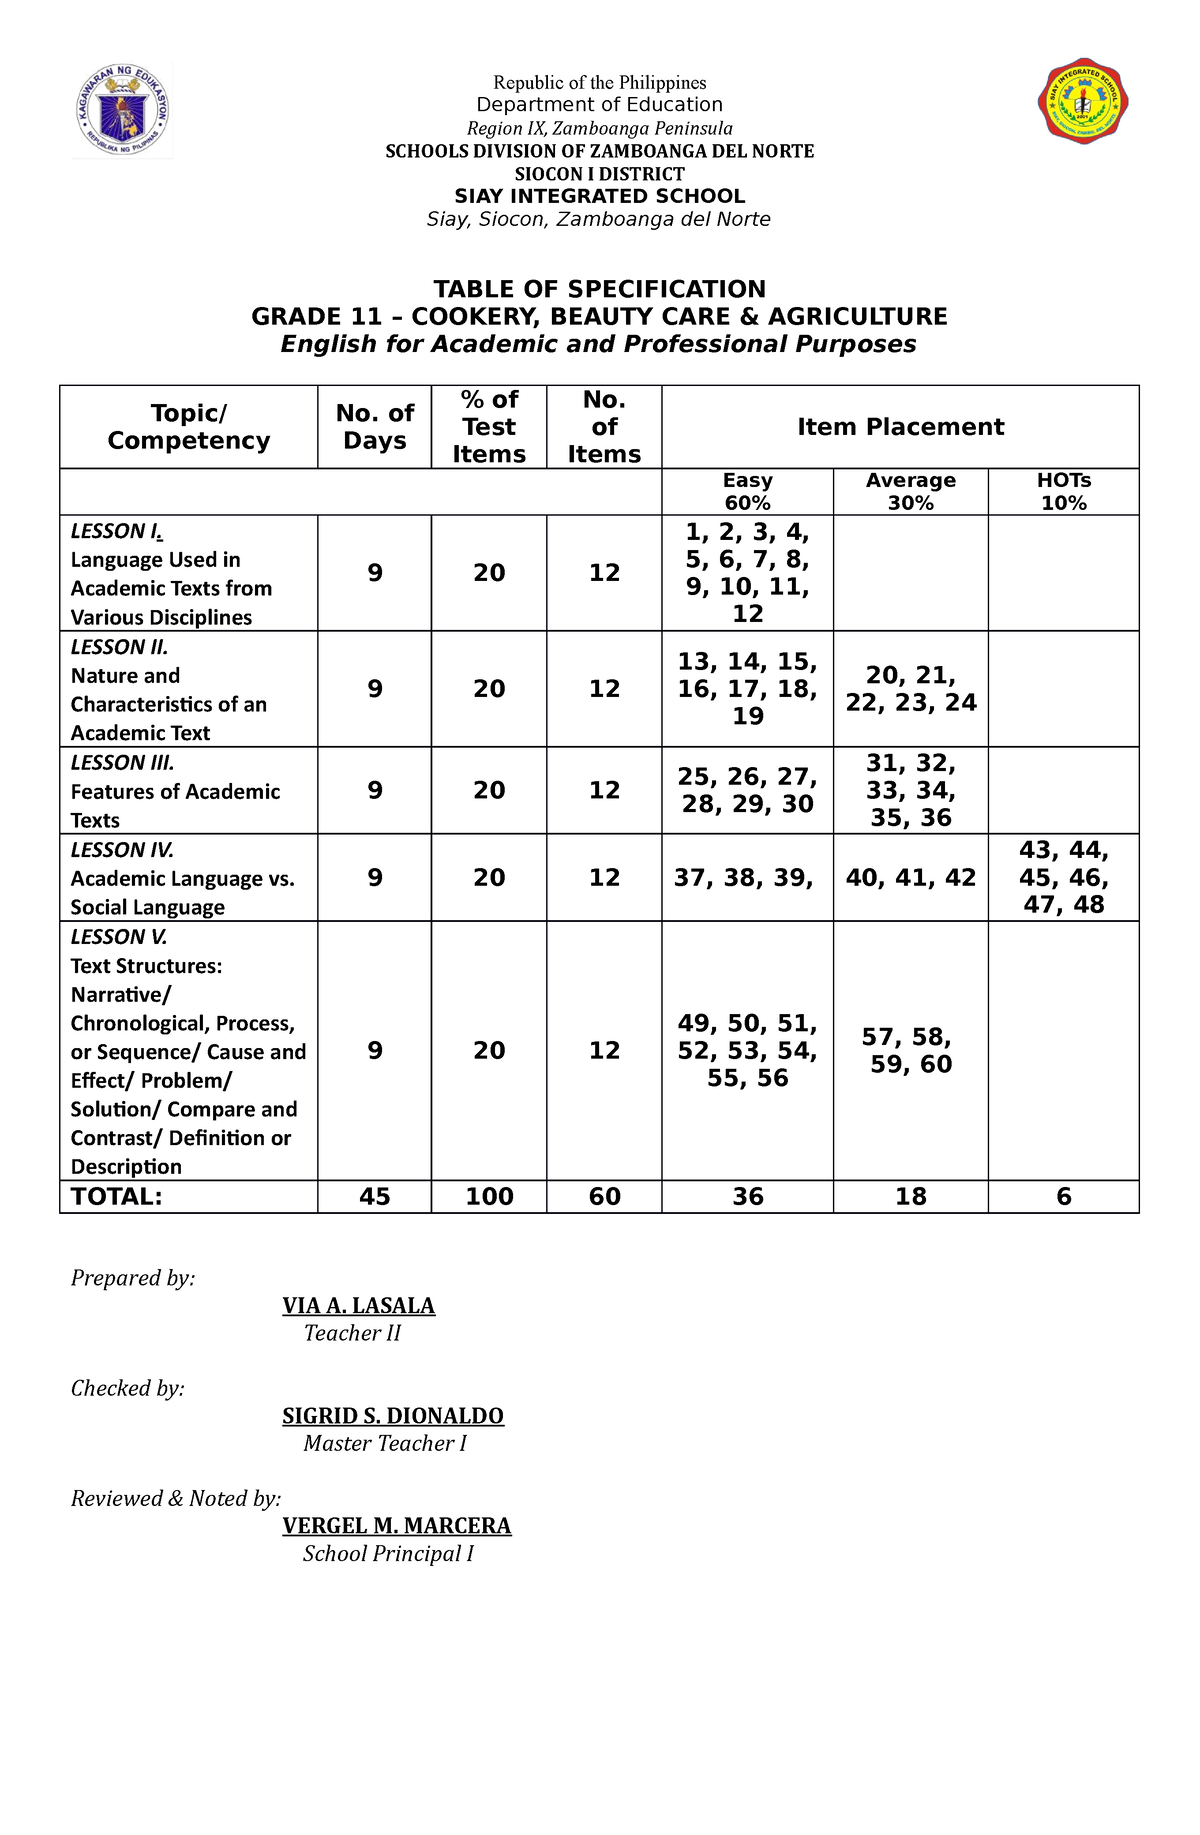 EAPP - TOS 3rd Quarter - Table of Specification - Republic of the ...